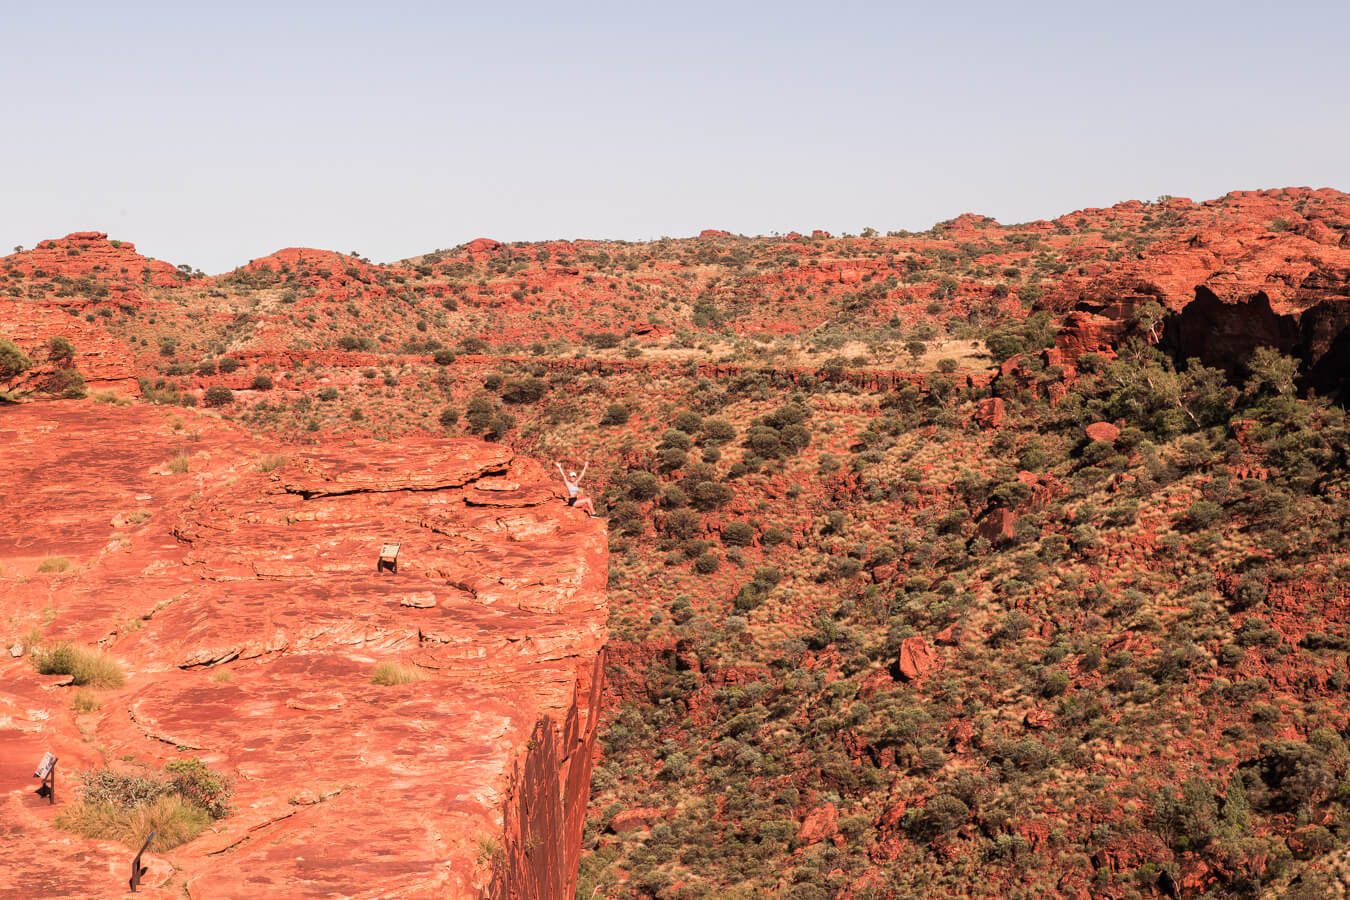 A 5 day Uluru Discovery tour with Topdeck | Where's Mollie? A travel and adventure lifestyle blog